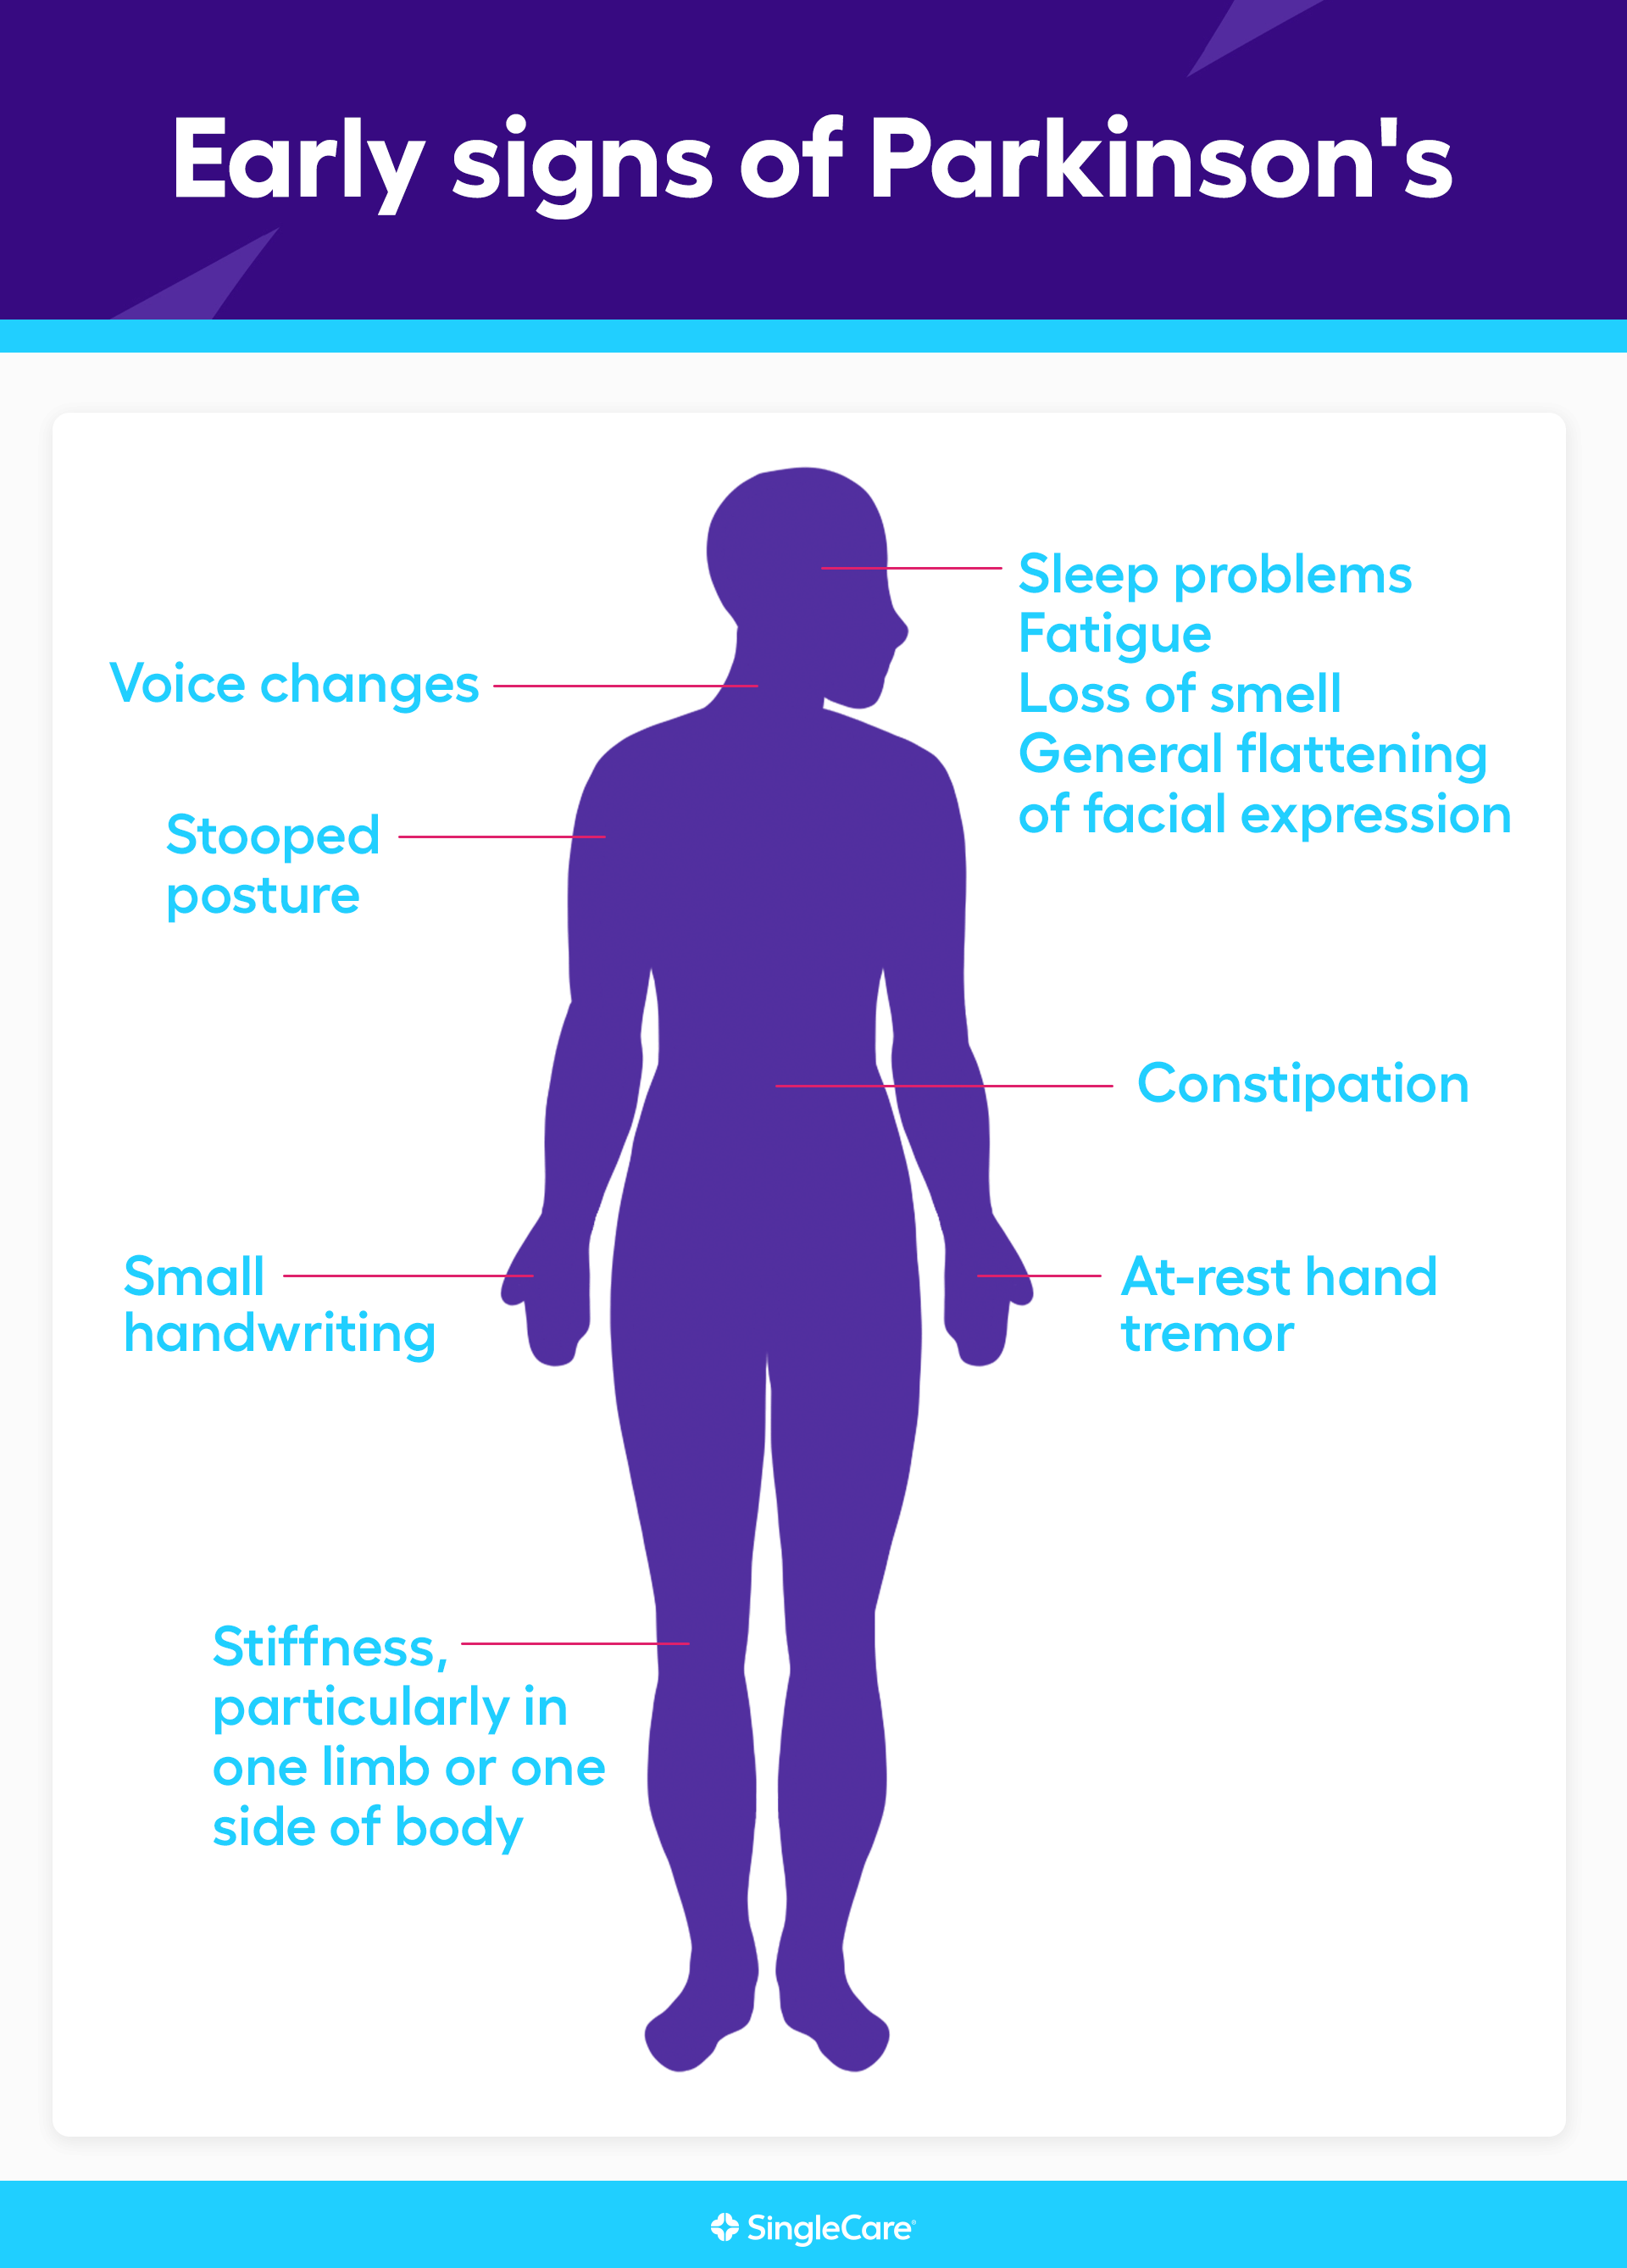 A diagram showing which body parts are affected first by Parkinson's